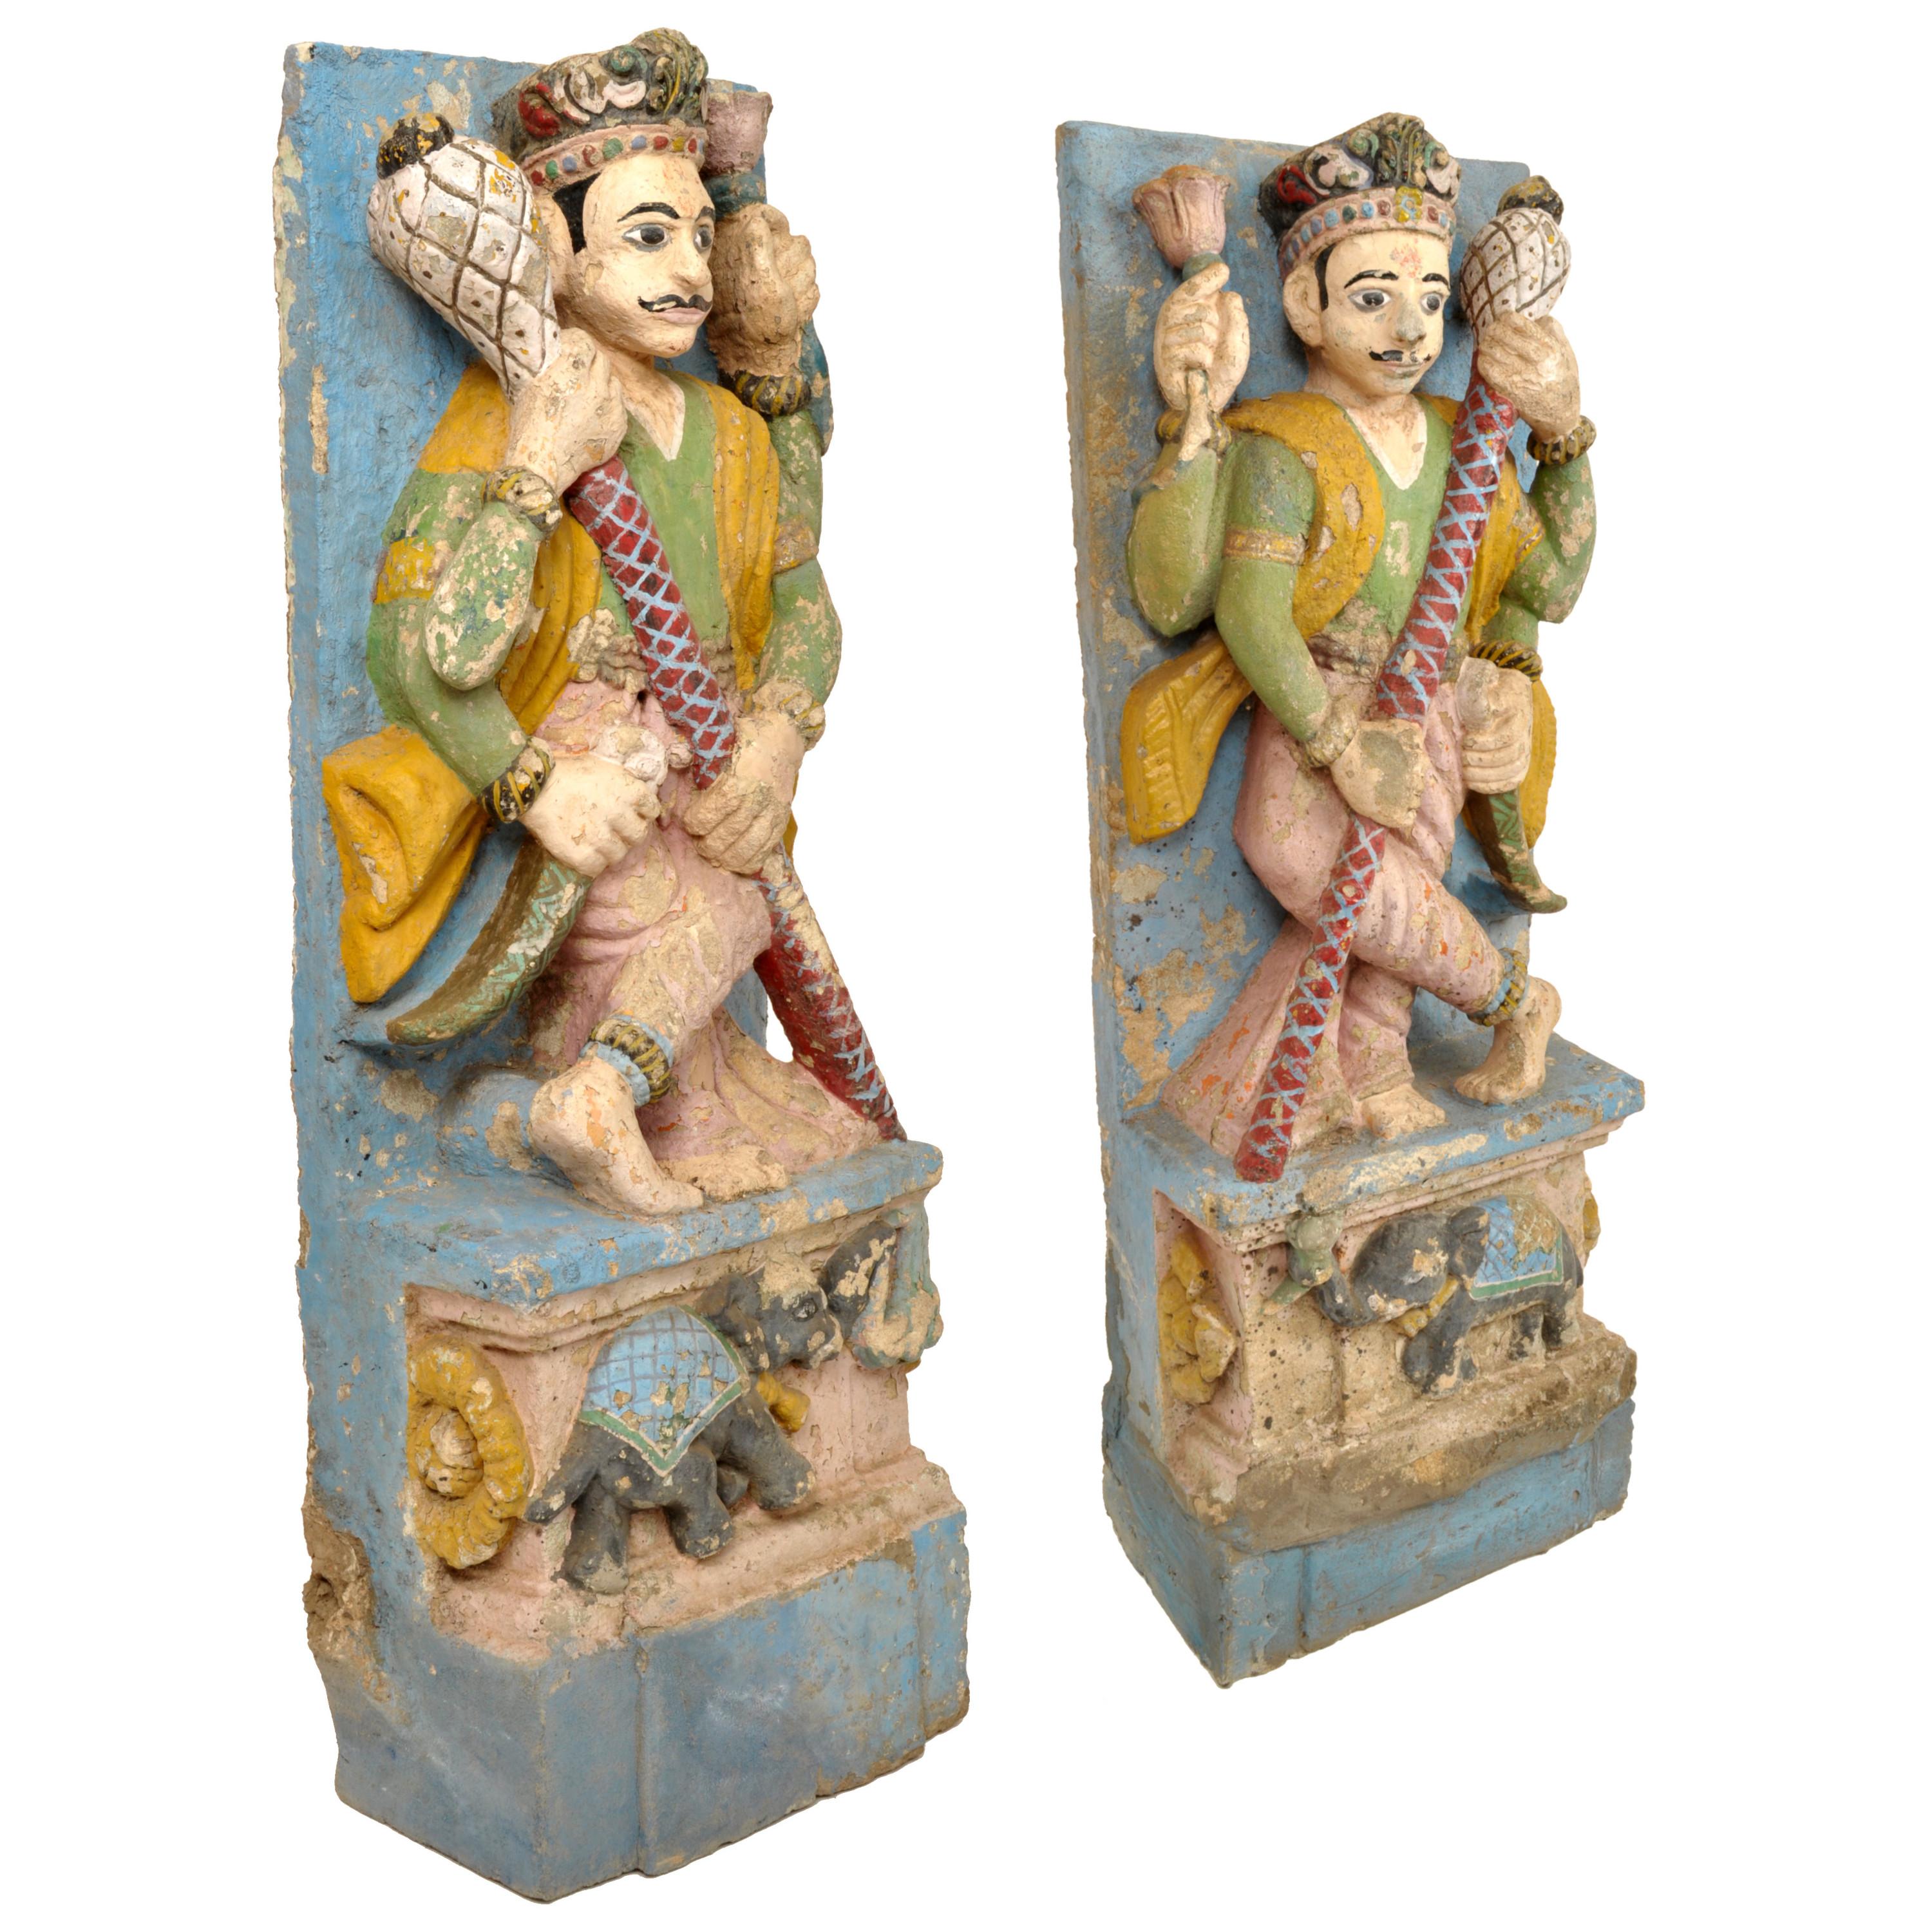 A large & important pair of rare antique 19th century Indian Polychromed & hand carved stone Dvarpala (temple door guard) statues, circa 1850. 

Each statue is hand carved as a male Hindu four armed temple guard, the guards holding a mace (Gada) and